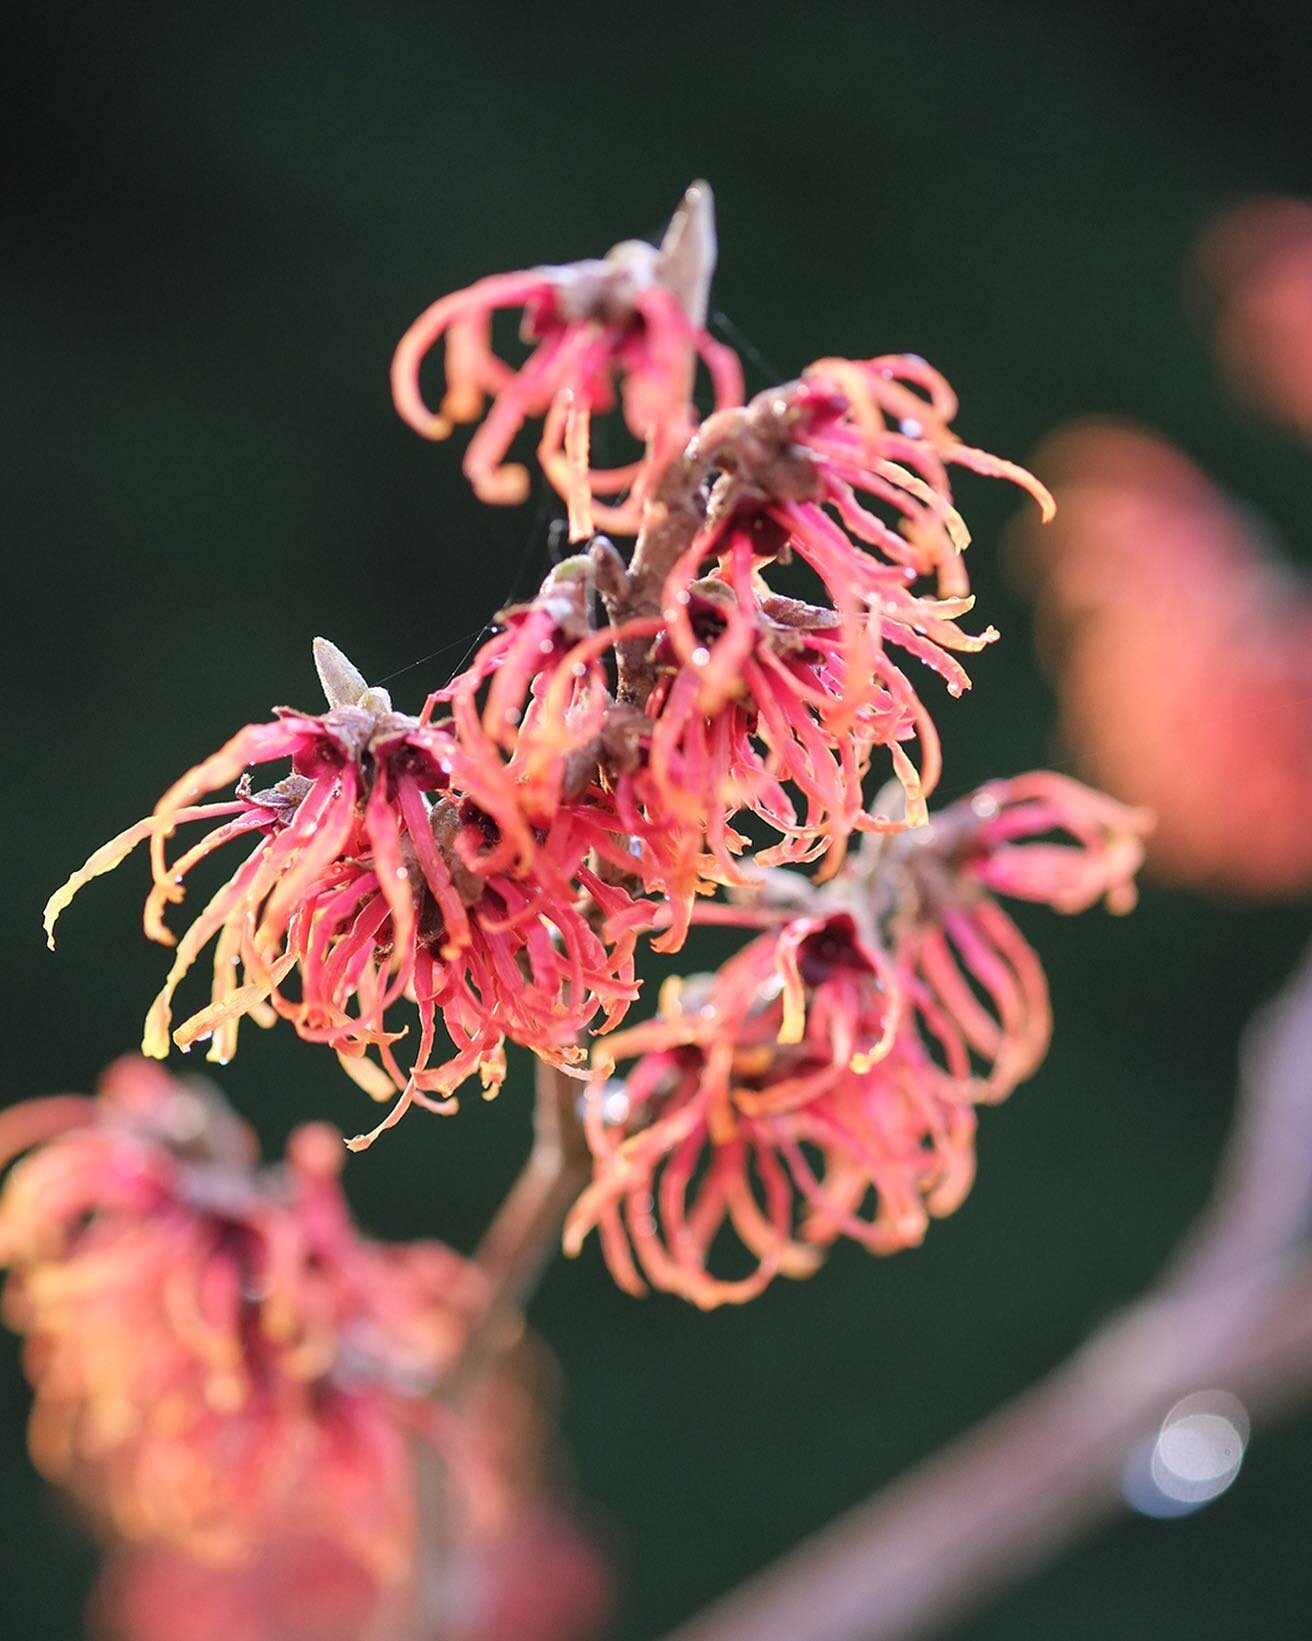 Something for winter in the garden.

Hamamelis x intermedia &lsquo;Jelena&rsquo; flowers glowing,  backlit by the winter sun. 

&lsquo;Jelena&rsquo; is one of the earliest flowering witch hazel. This photo was taken over Christmas.

#wintergarden